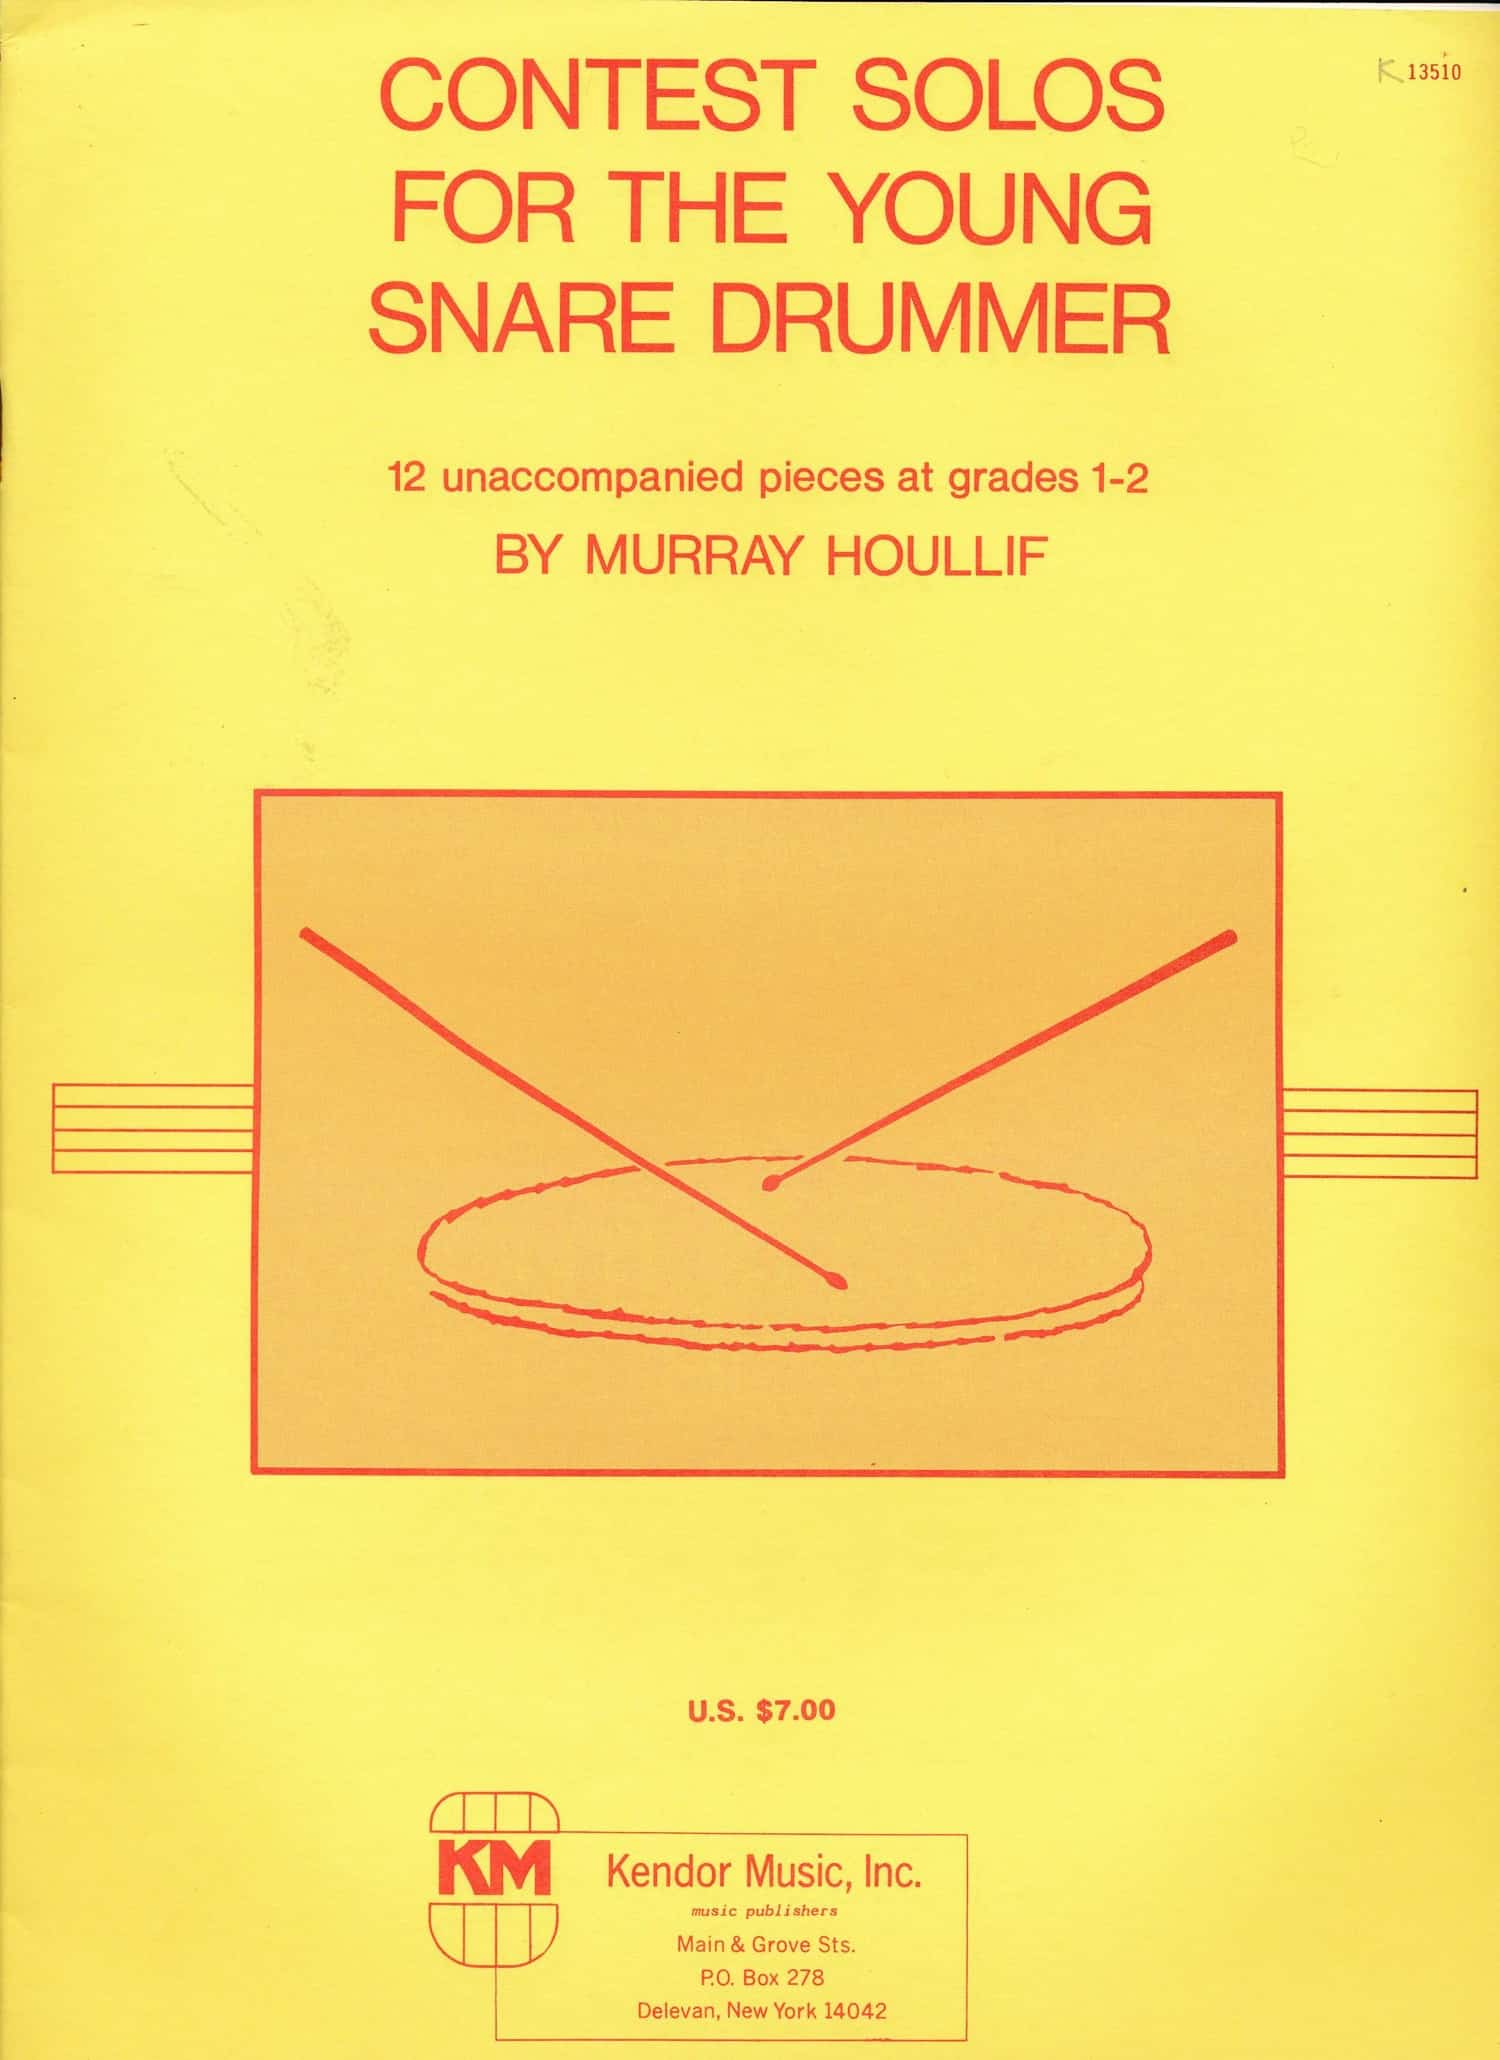 Contest Solos For The Young Snare Drummer